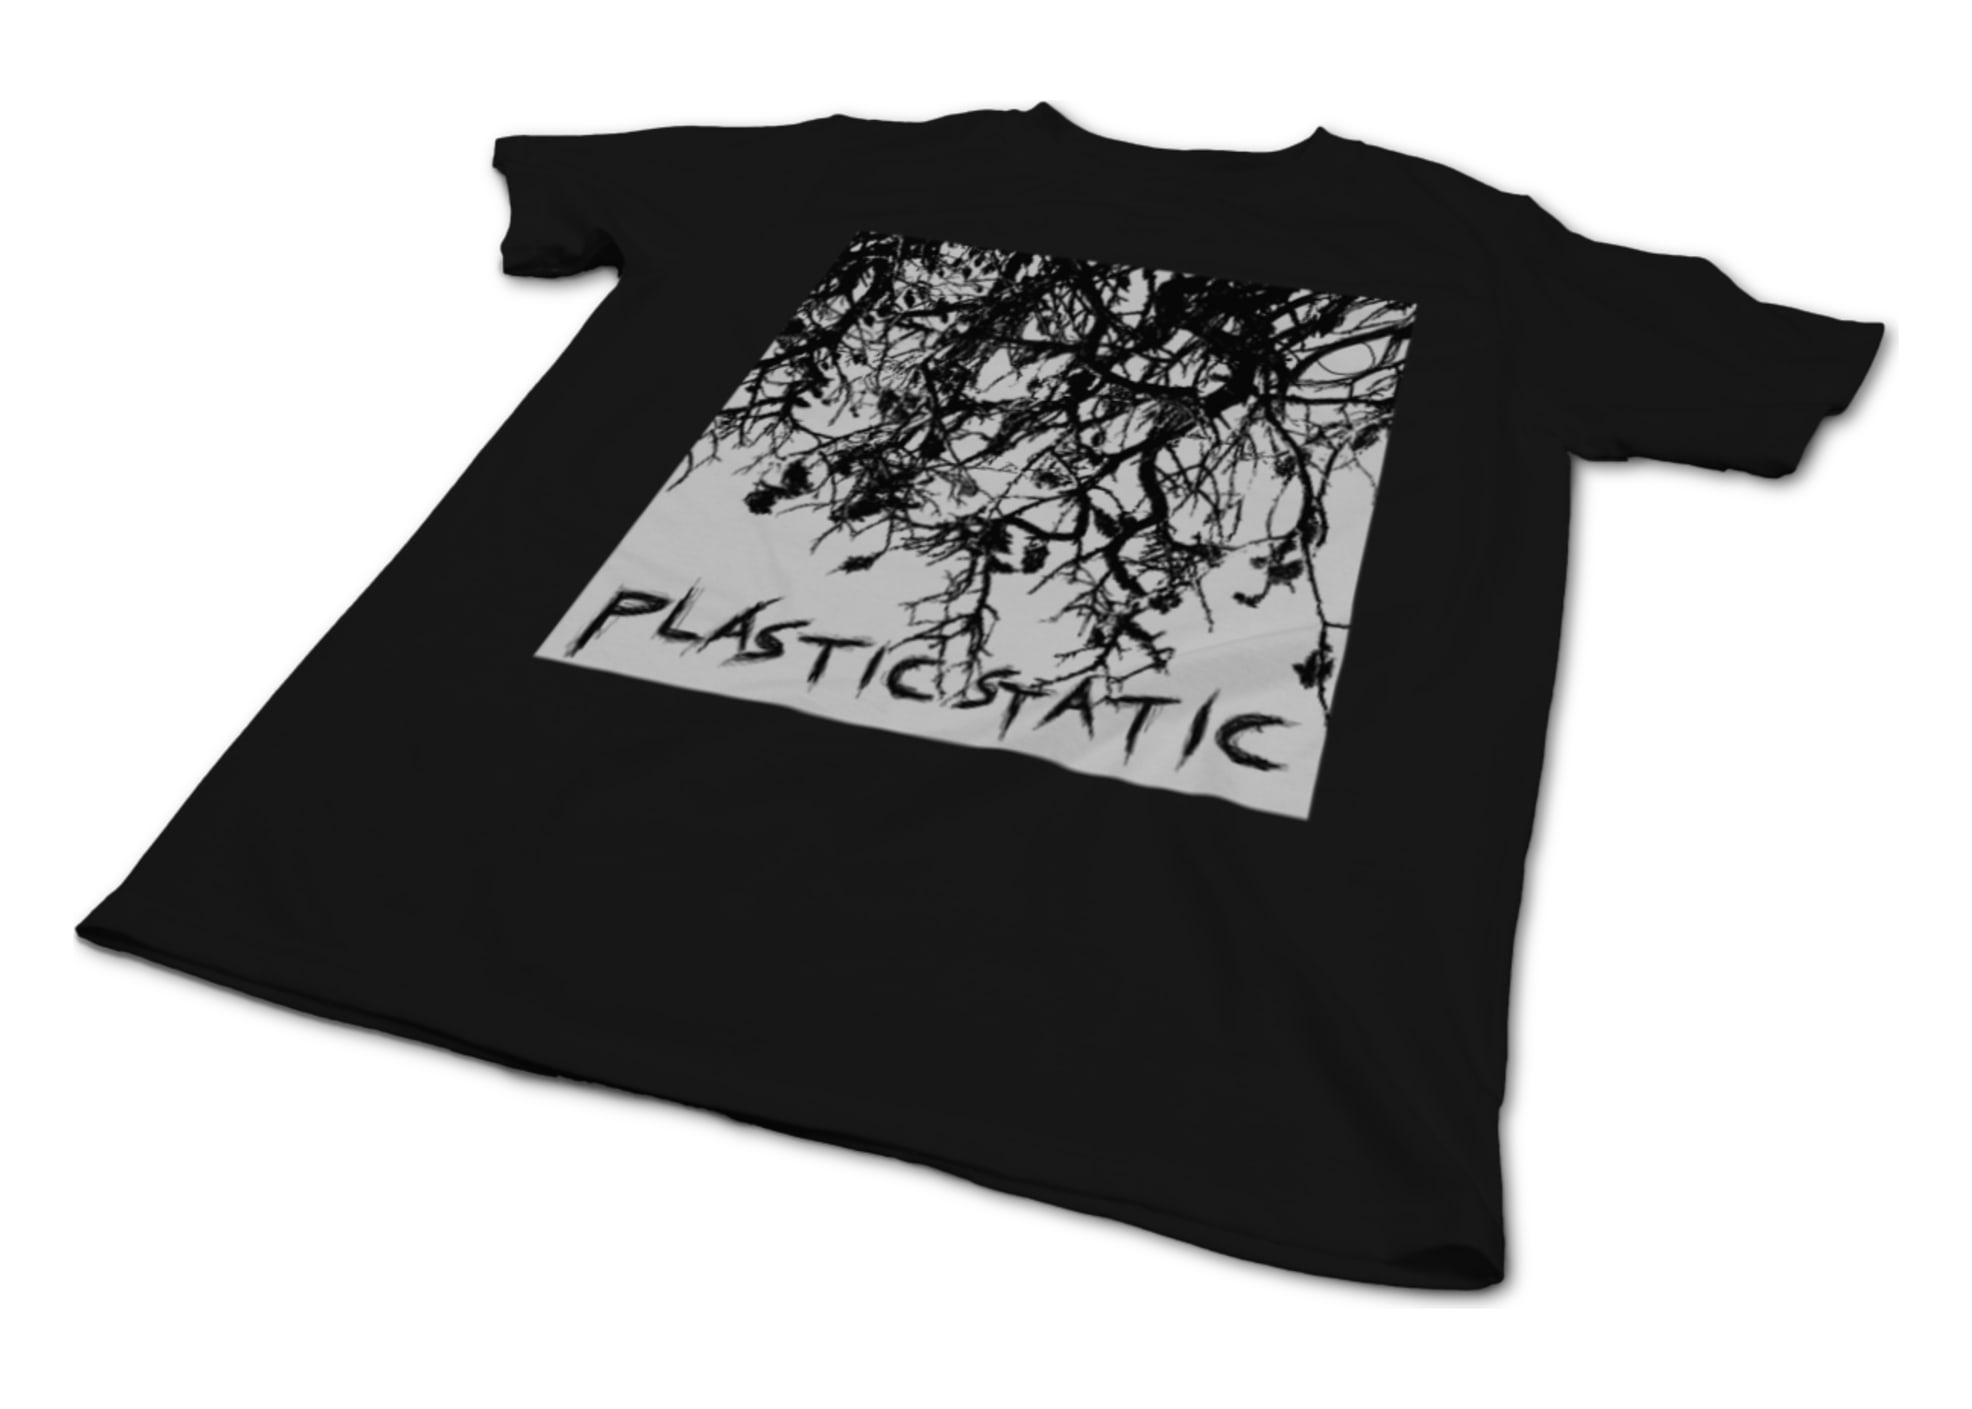 Plasticstatic a body in the brush shirt 1608415776